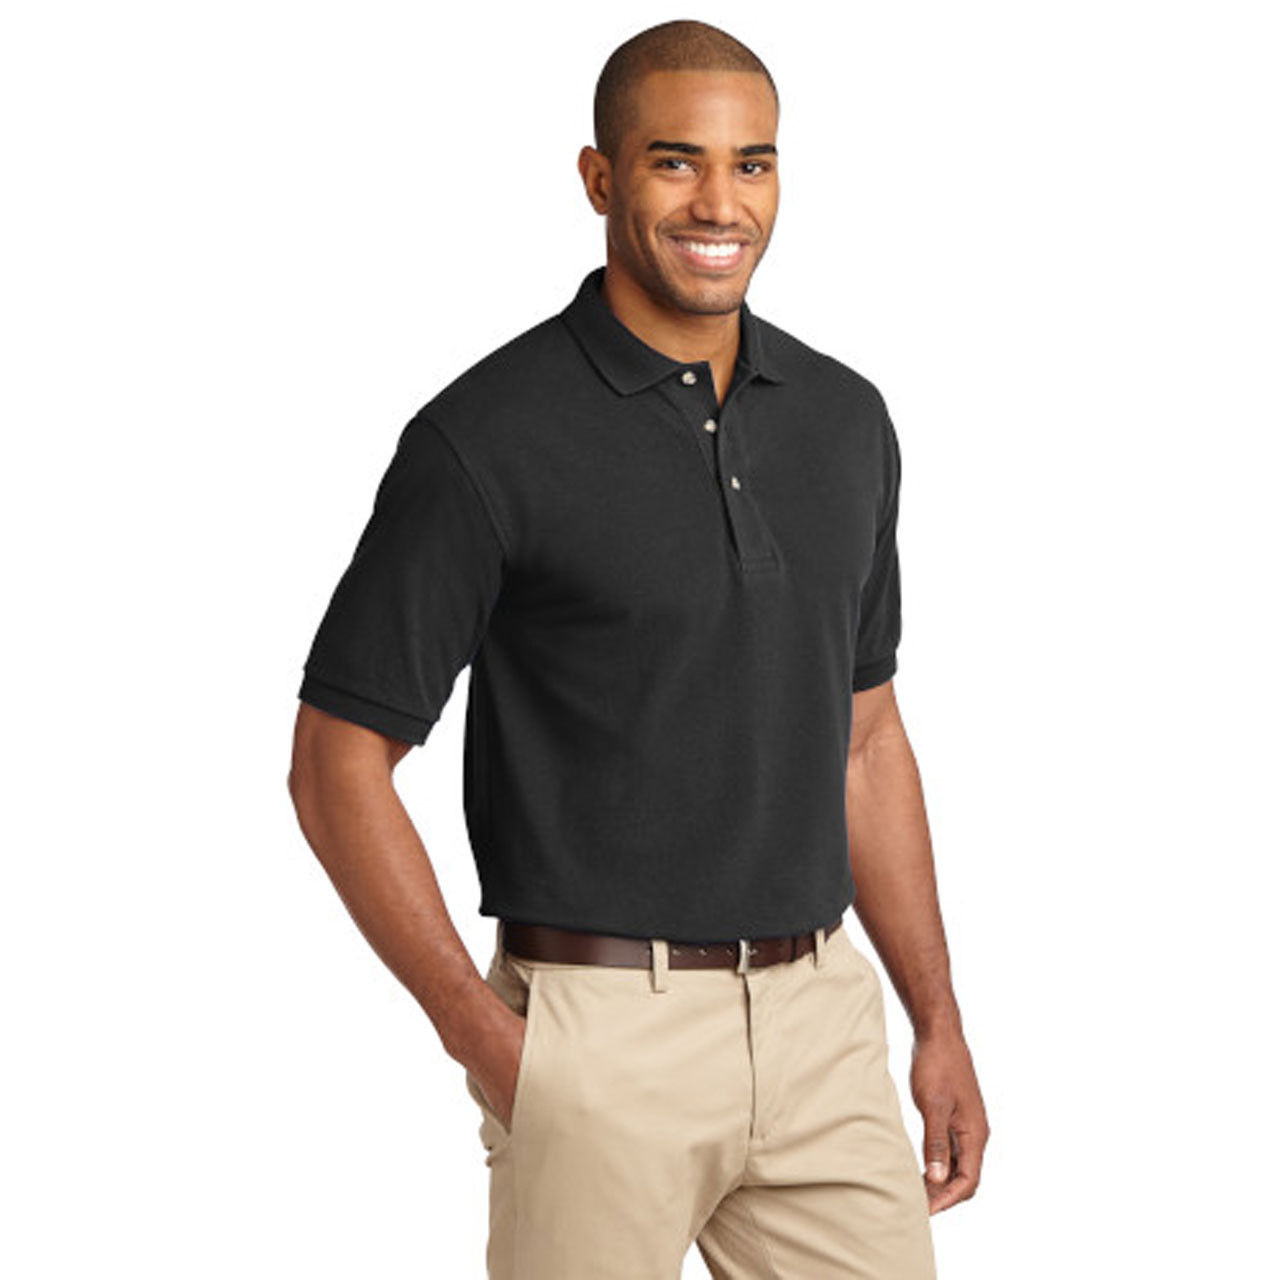 Is the boxercraft wholesale polo s suitable for men's group events?